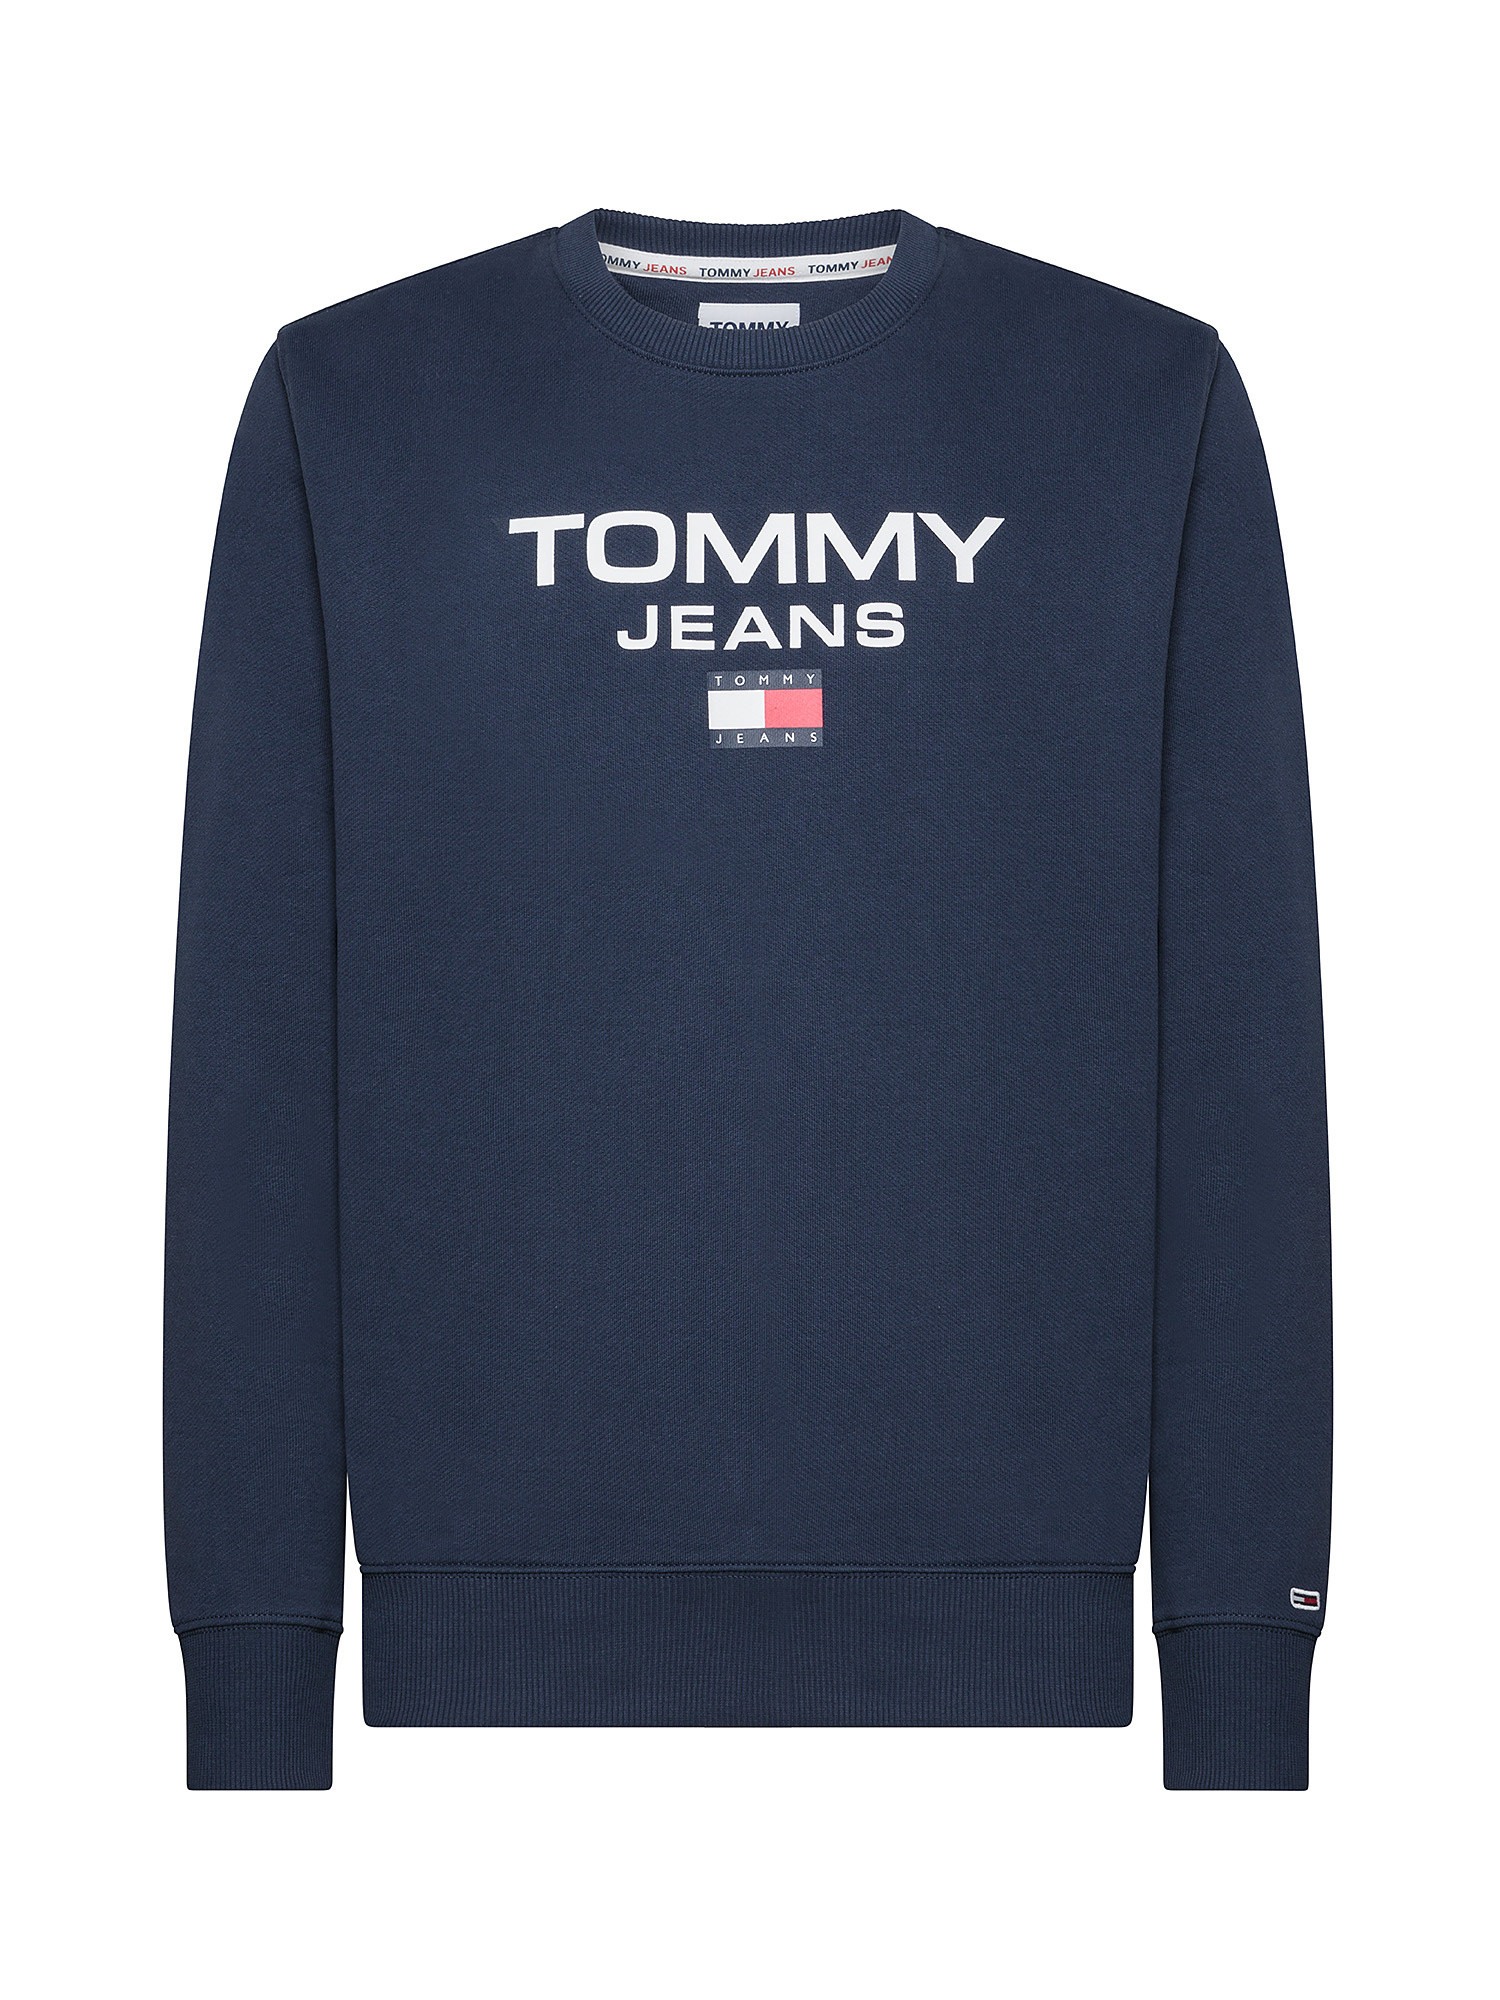 Tommy Jeans - Cotton crewneck sweatshirt with logo print on the front, Blue, large image number 0